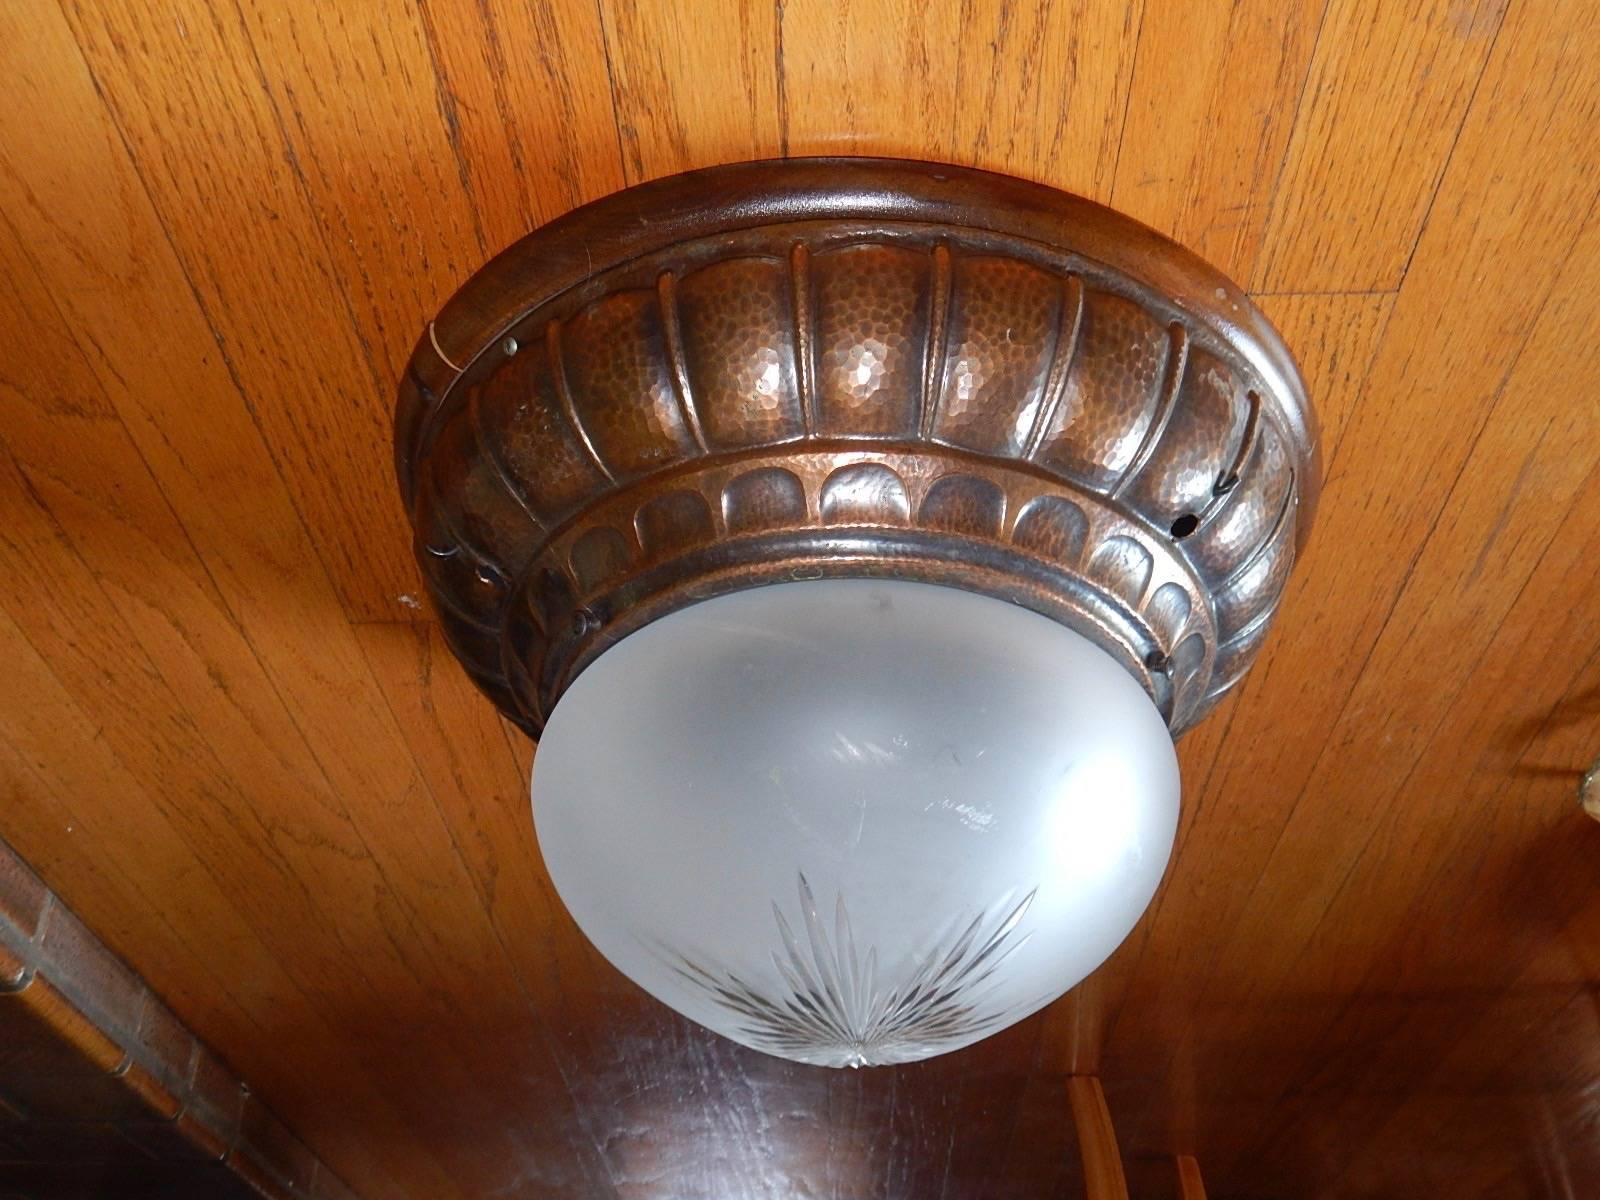 Swedish Arts & Crafts era flush mount lighting fixture in hand-hammered copper. With original all etched/sandblasted glass shade. Three bulb receptacles with standard bases. Price includes complete rewiring.